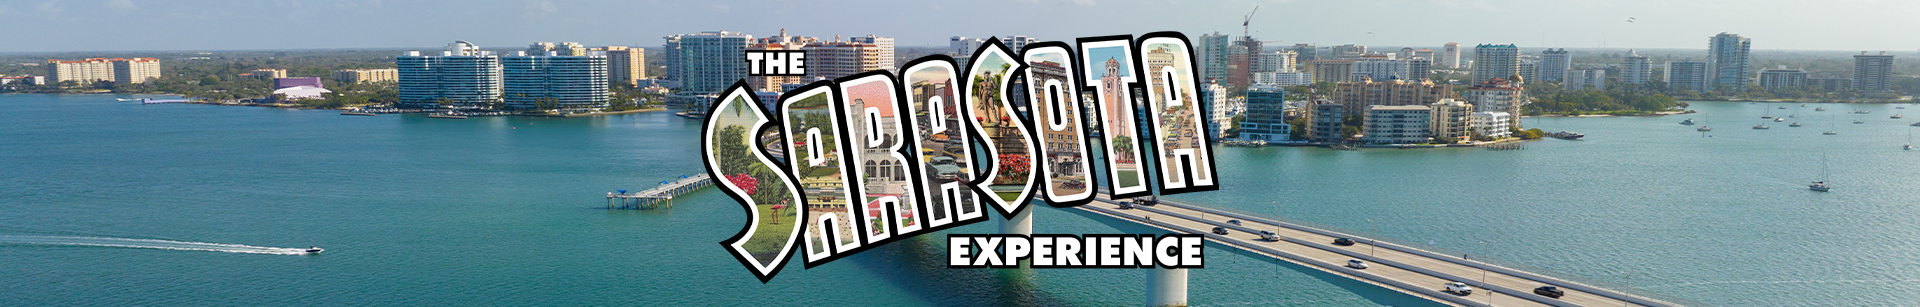 The Sarasota Experience | Logo in front of the city